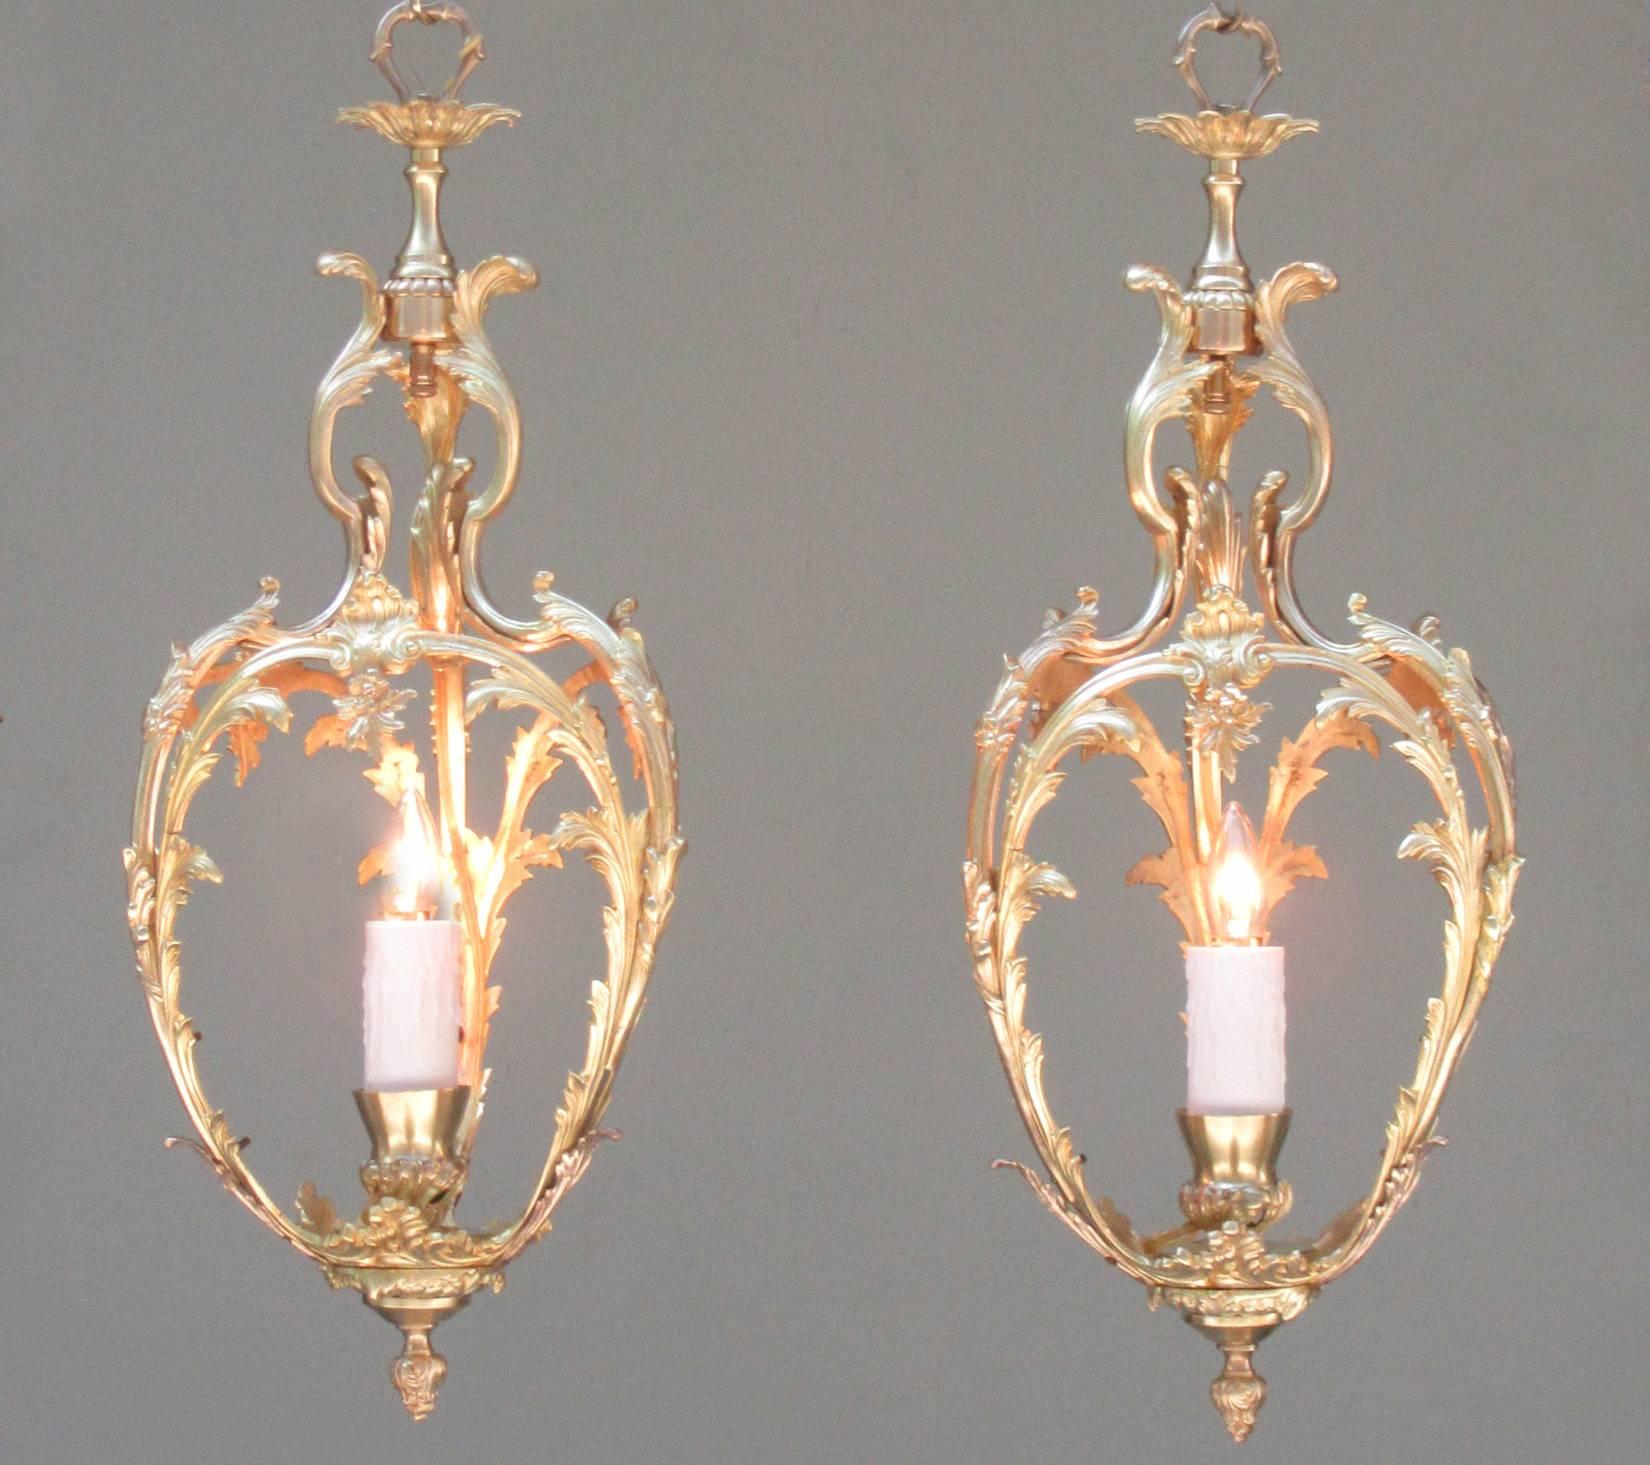 A pair of early 20th century French Louis XVI style bronze doré lanterns, circa 1910, featuring foliate castings and one candle bulb. There are two available; however, they may be purchased individually. They have recently been cleaned and rewired